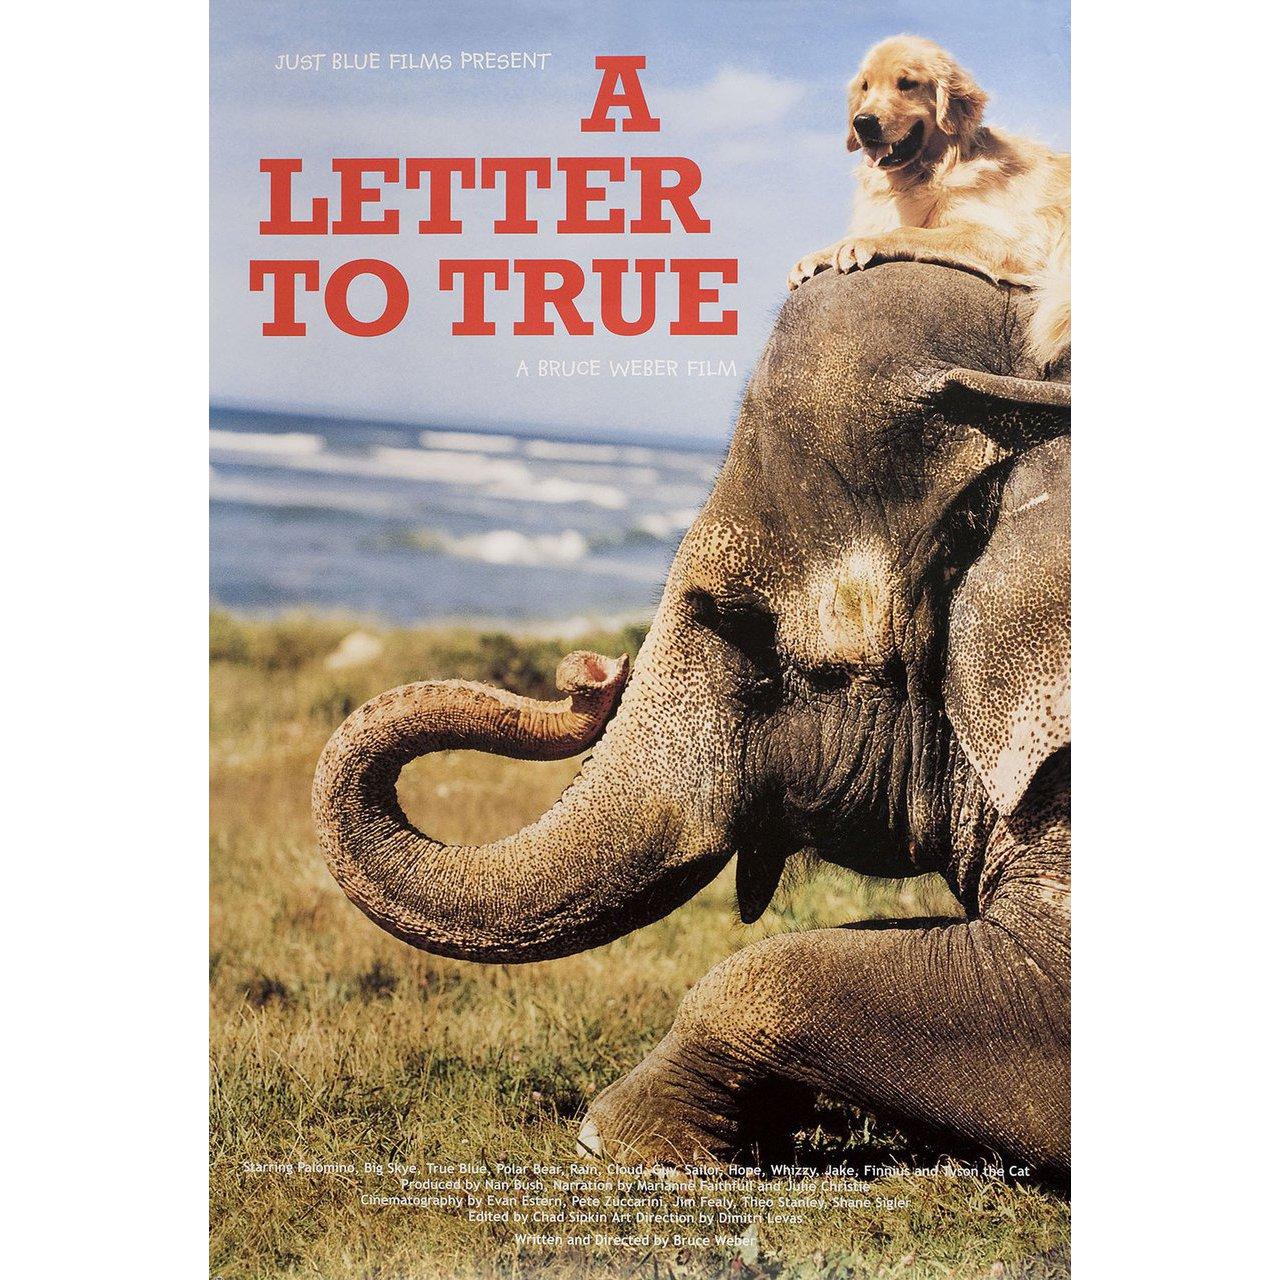 Original 2004 U.S. poster for the documentary film A Letter to True directed by Bruce Weber with Julie Christie / Marianne Faithfull / Bruce Weber / Thomas Sessa. Very good-fine condition, rolled. Please note: the size is stated in inches and the